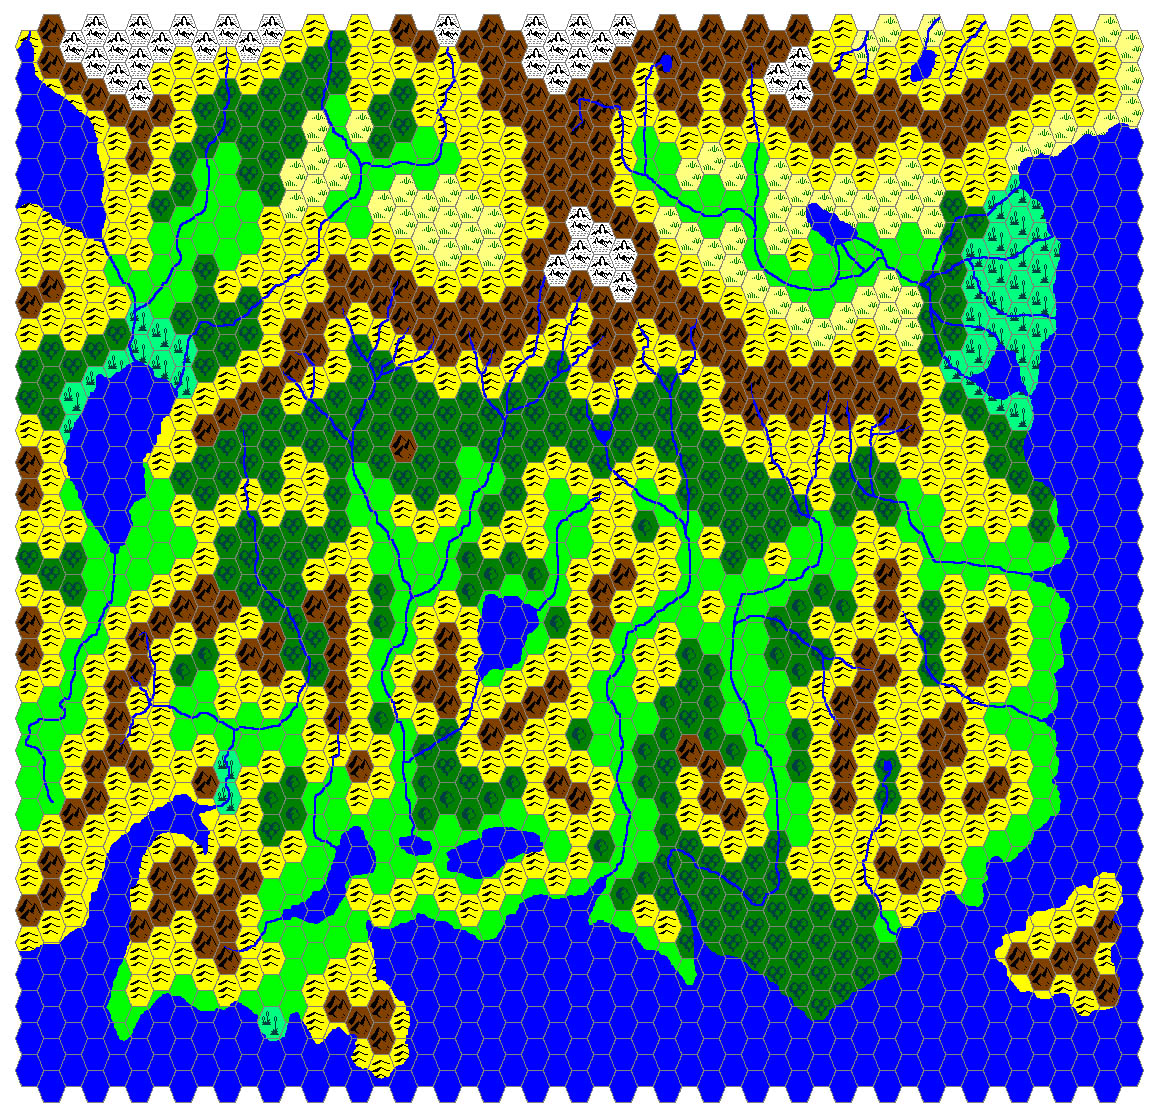 Taymora 3000-2500 BC, 24 miles per hex, by James Mishler, March 1999